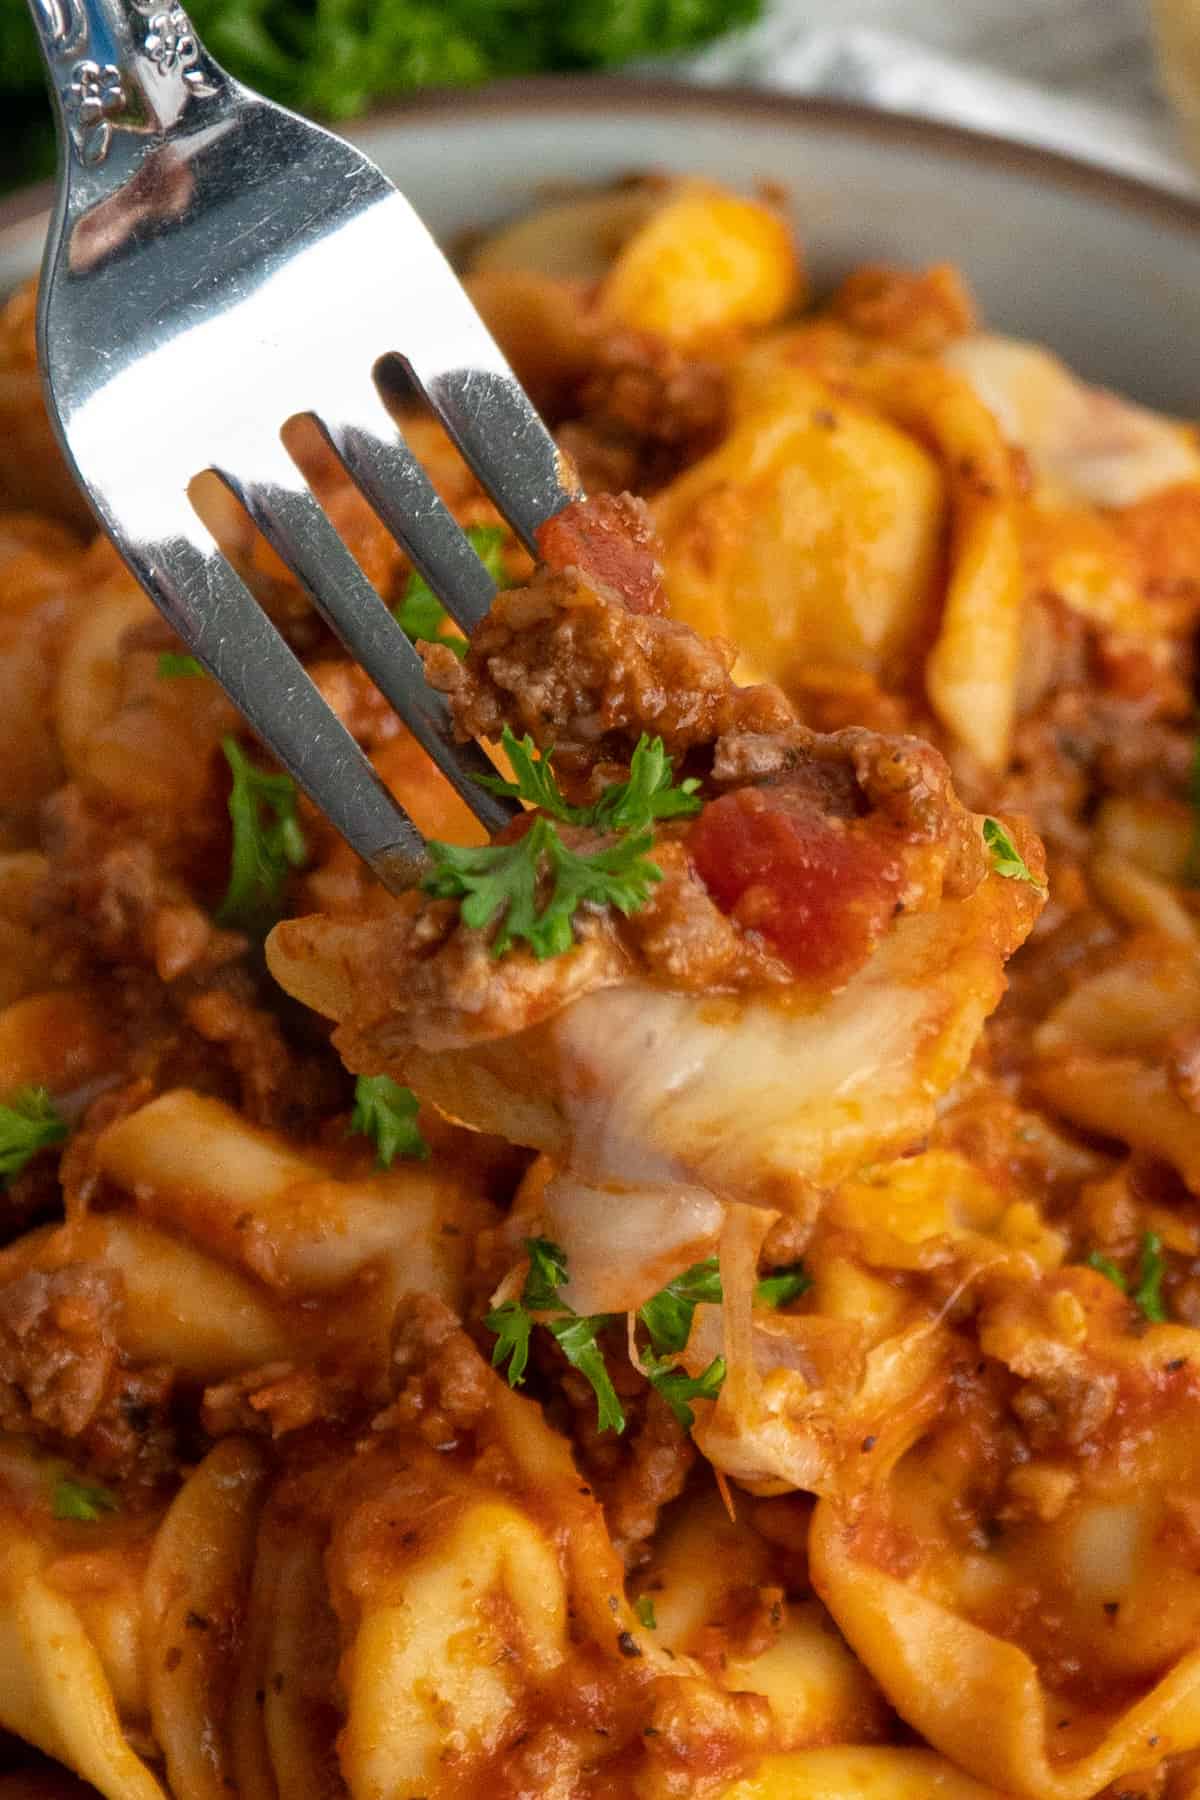 A fork holding a tortellini in a meat sauce.